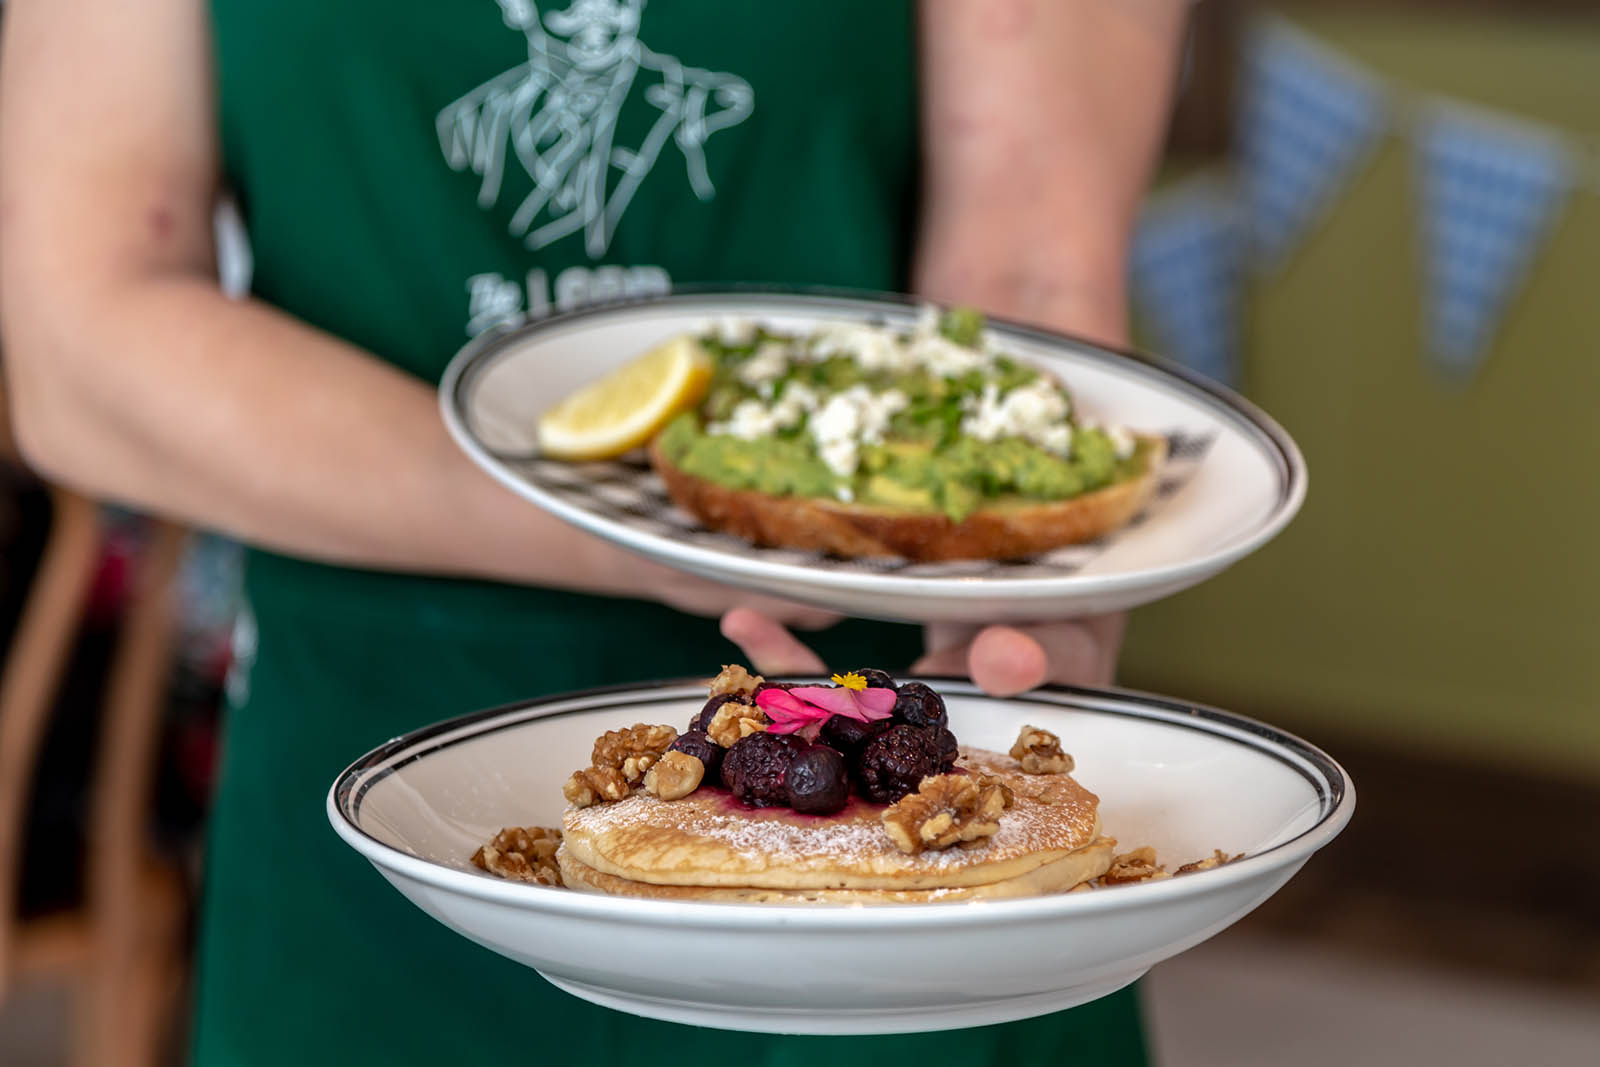 The Lord Lamington breakfast avocado on toast and berry pancakes | Paddock to Gate: BNE Airport's dining philosophy